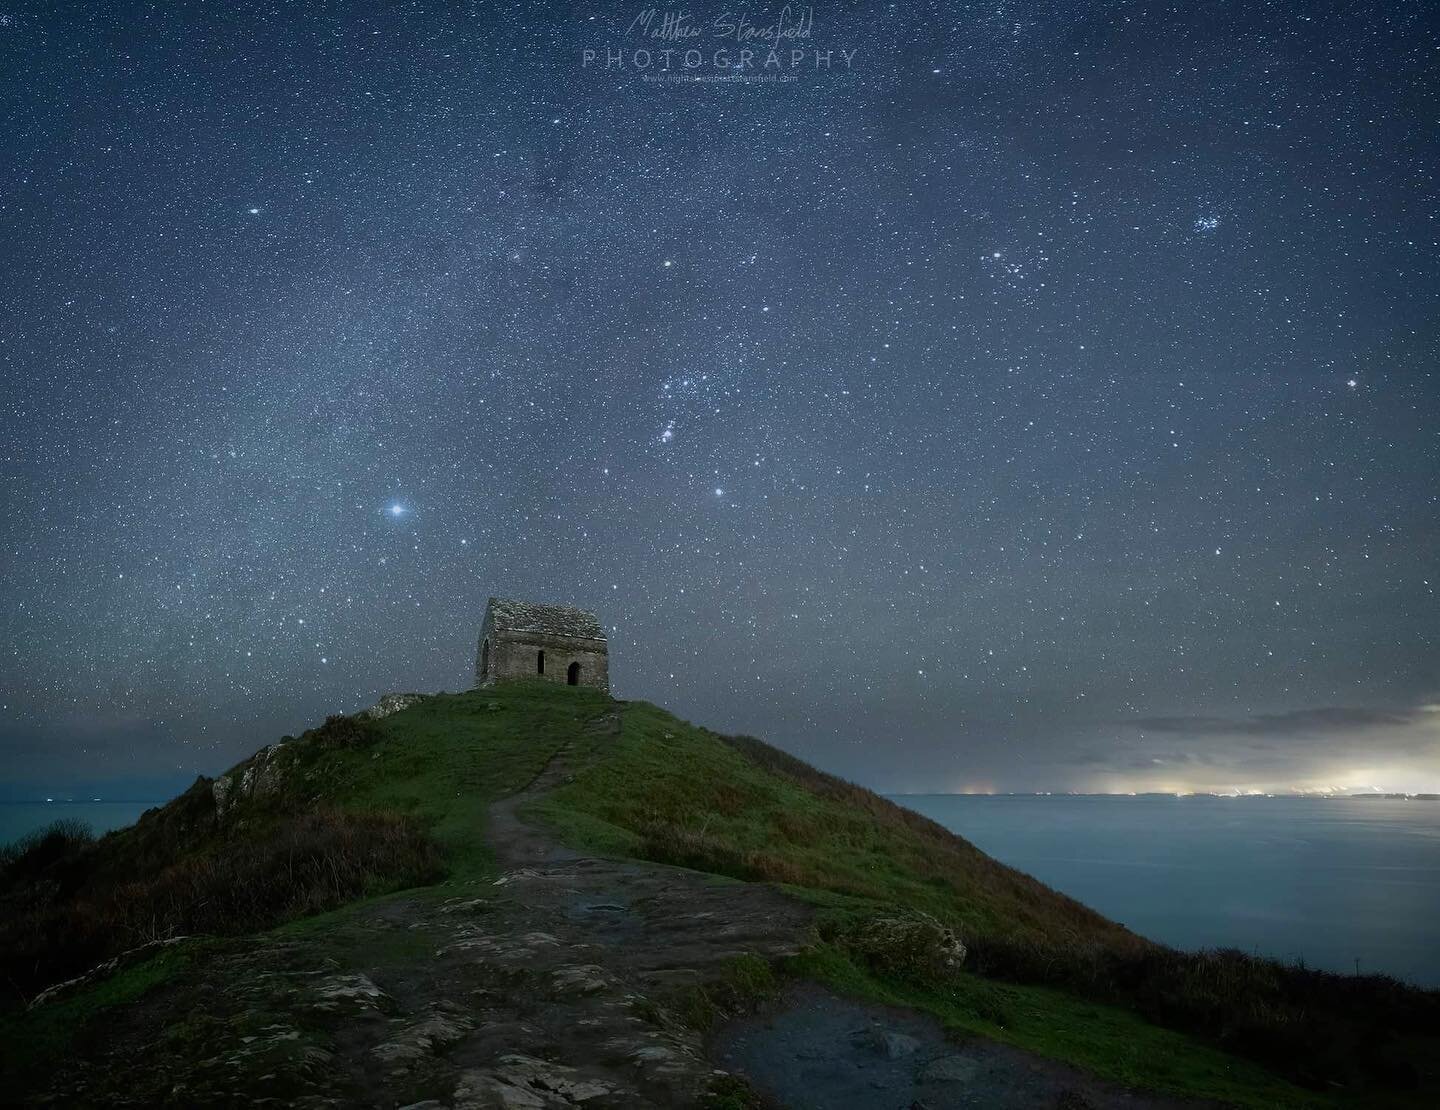 Rame Head - Cornwall
Web: www.nightskies.mattstansfield.com

For this evening, I thought I would share an image taken from Rame Head. The southeast coast of Cornwall is always my go-to location when the weather's looking uncertain. Being so close to 